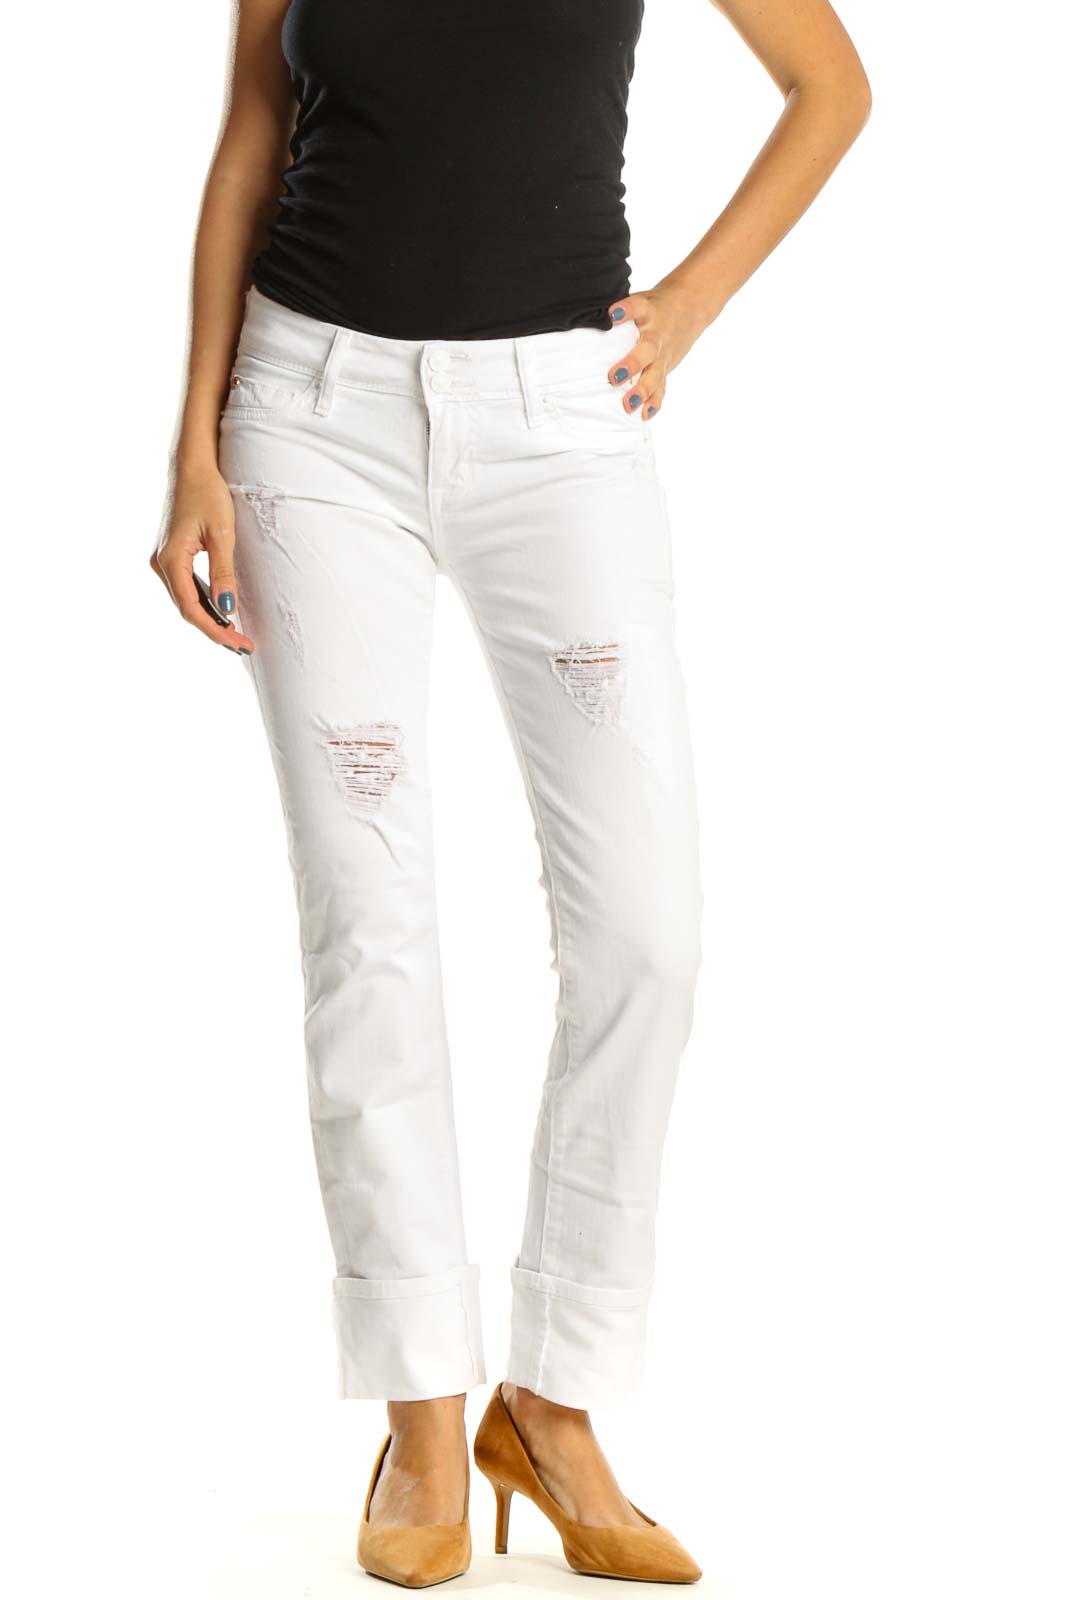 White Distressed Jeans Front